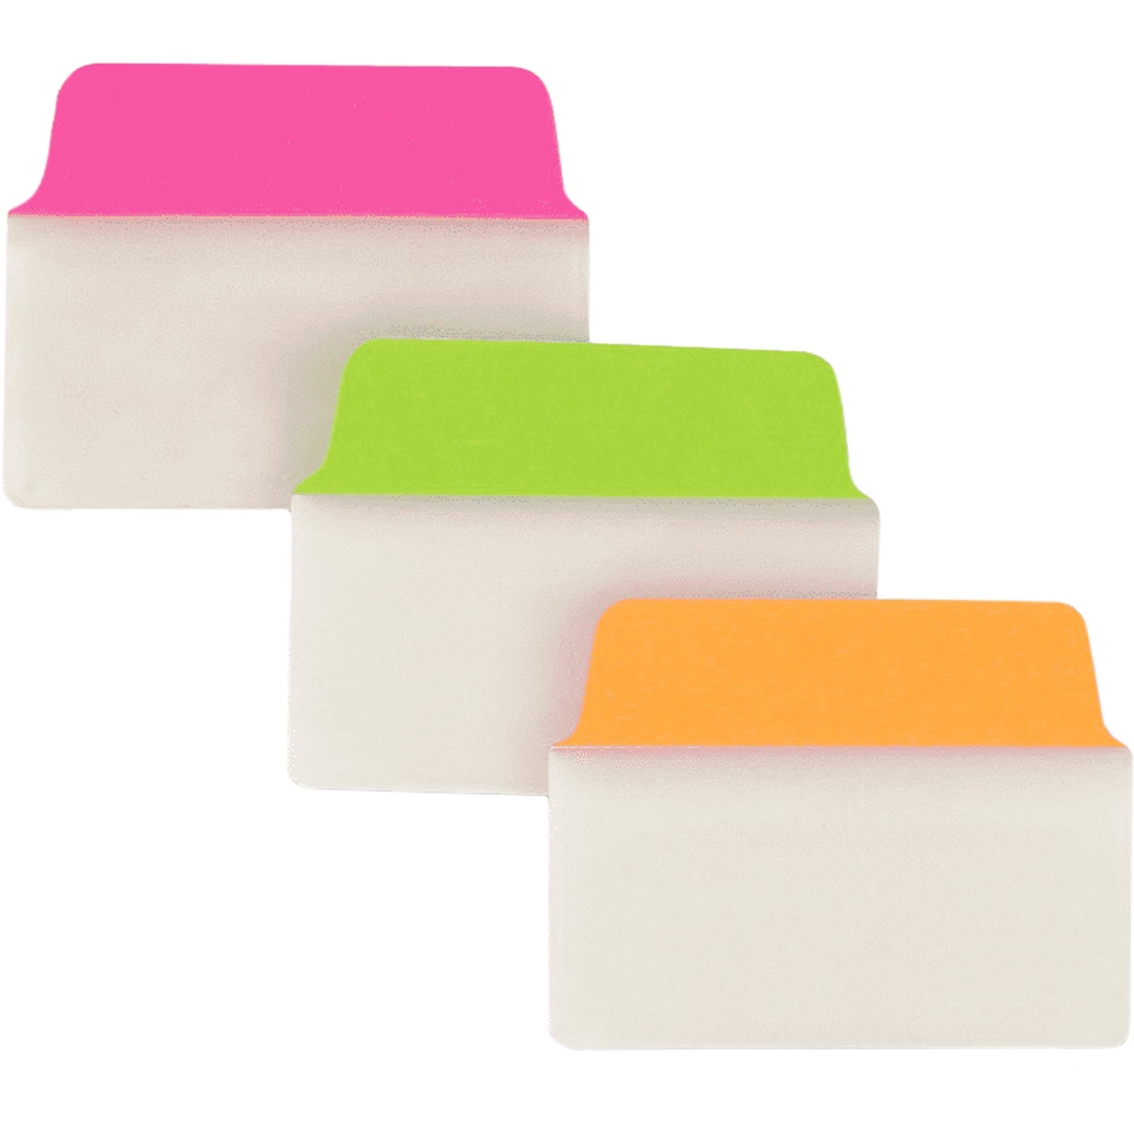 Avery Multiuse Ultra Tabs Neon Repositionable Two-Side Writable Tabs, 24 pk. - Image 2 of 3